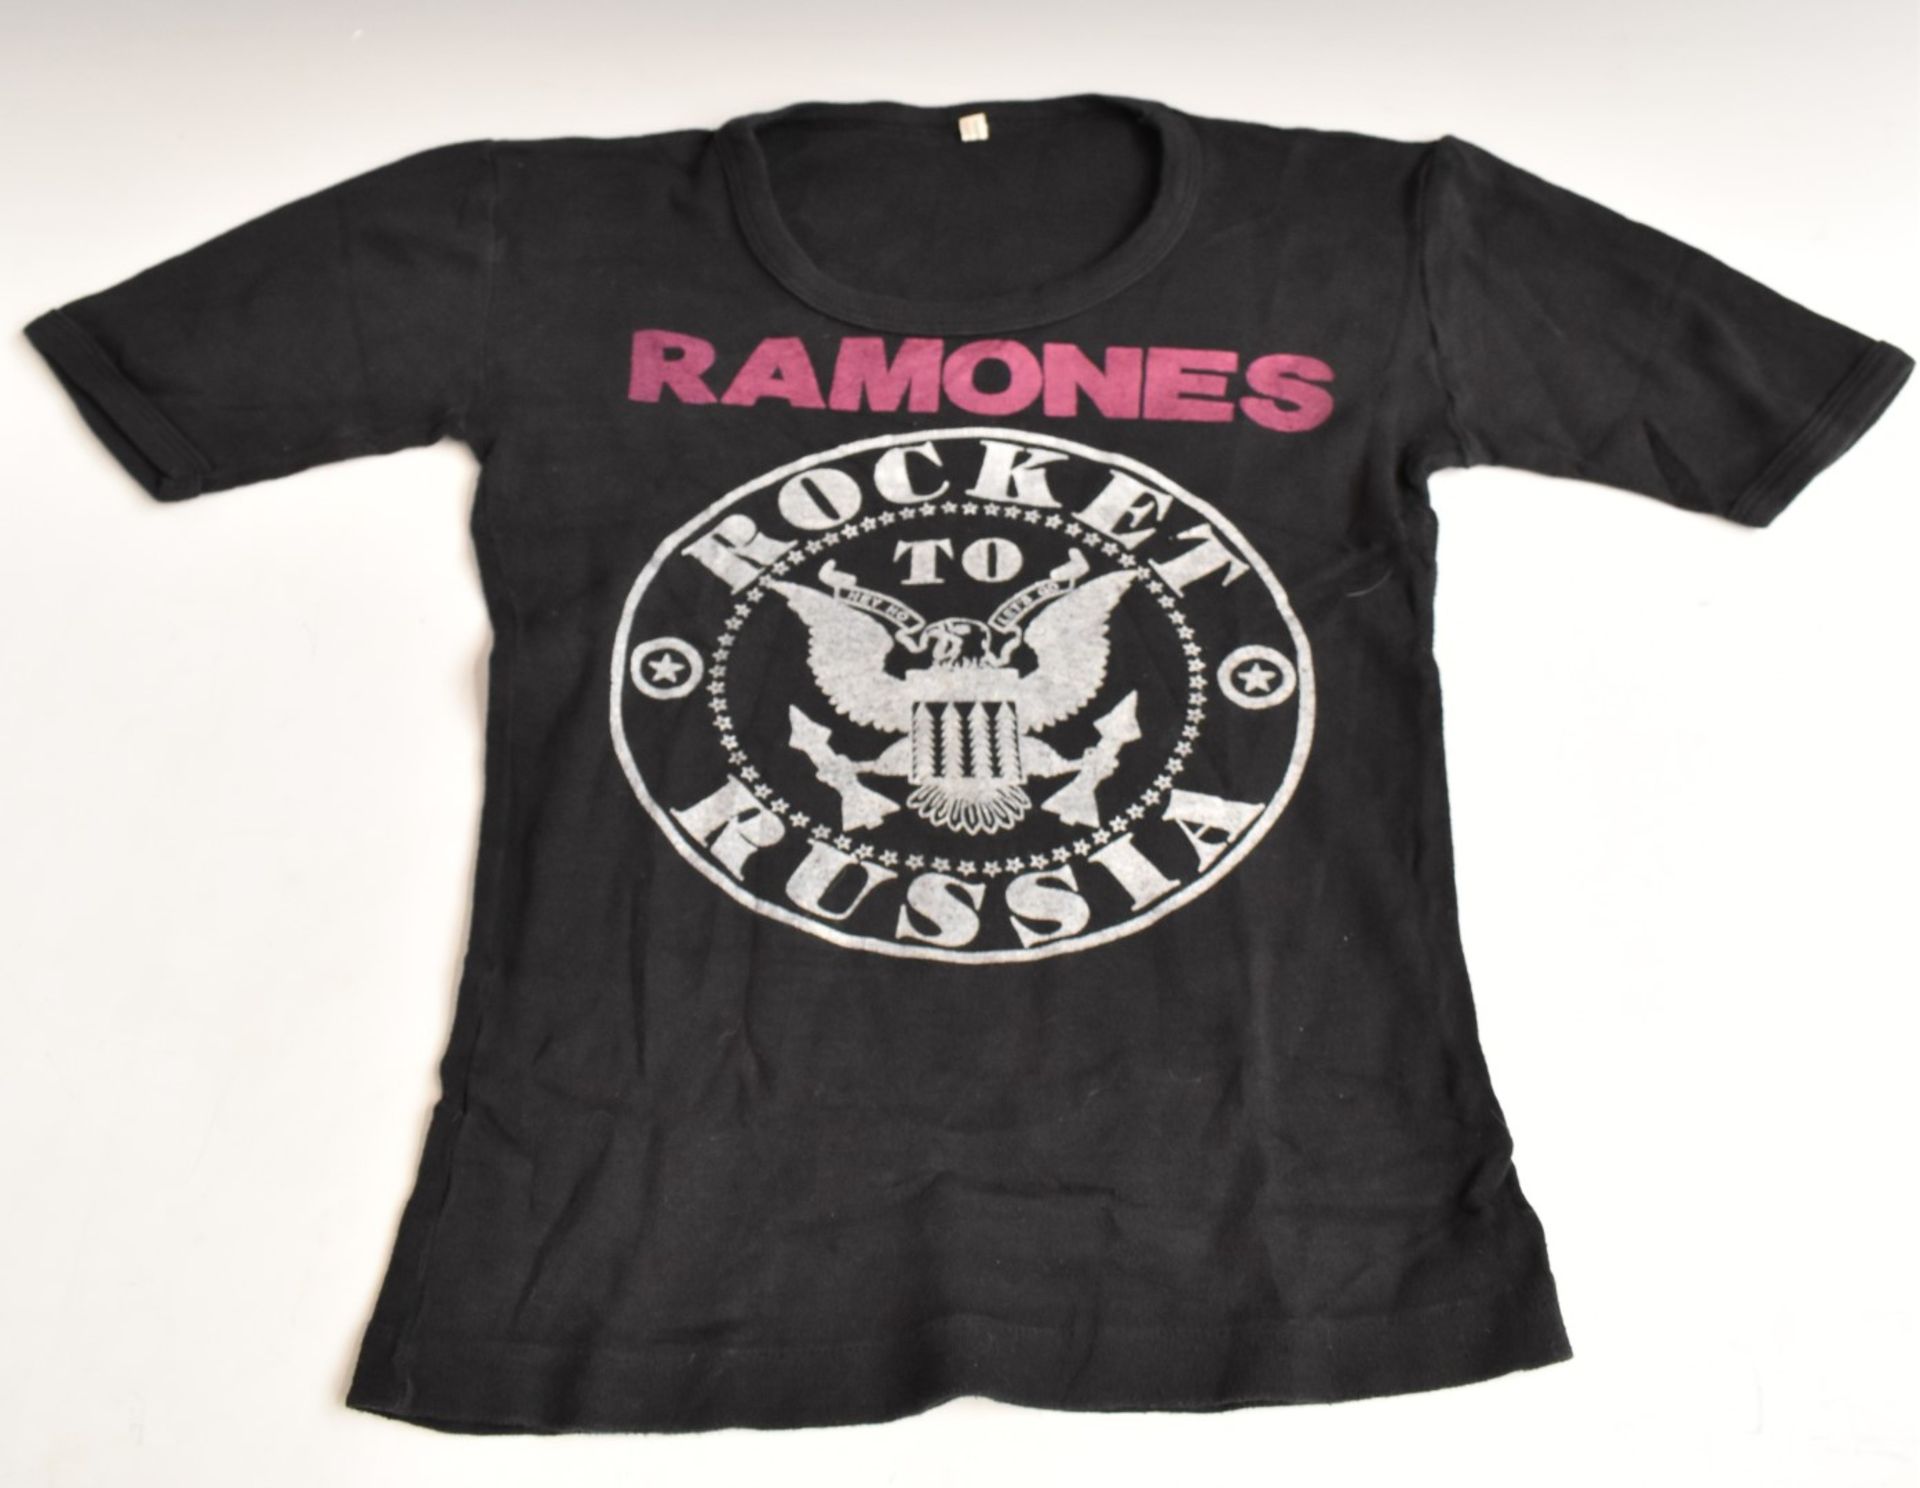 Twenty band T-shirts, to include Iron Maiden, Crobar, The Rods, Ramones, UK Subs and Stiff Records - Image 7 of 7